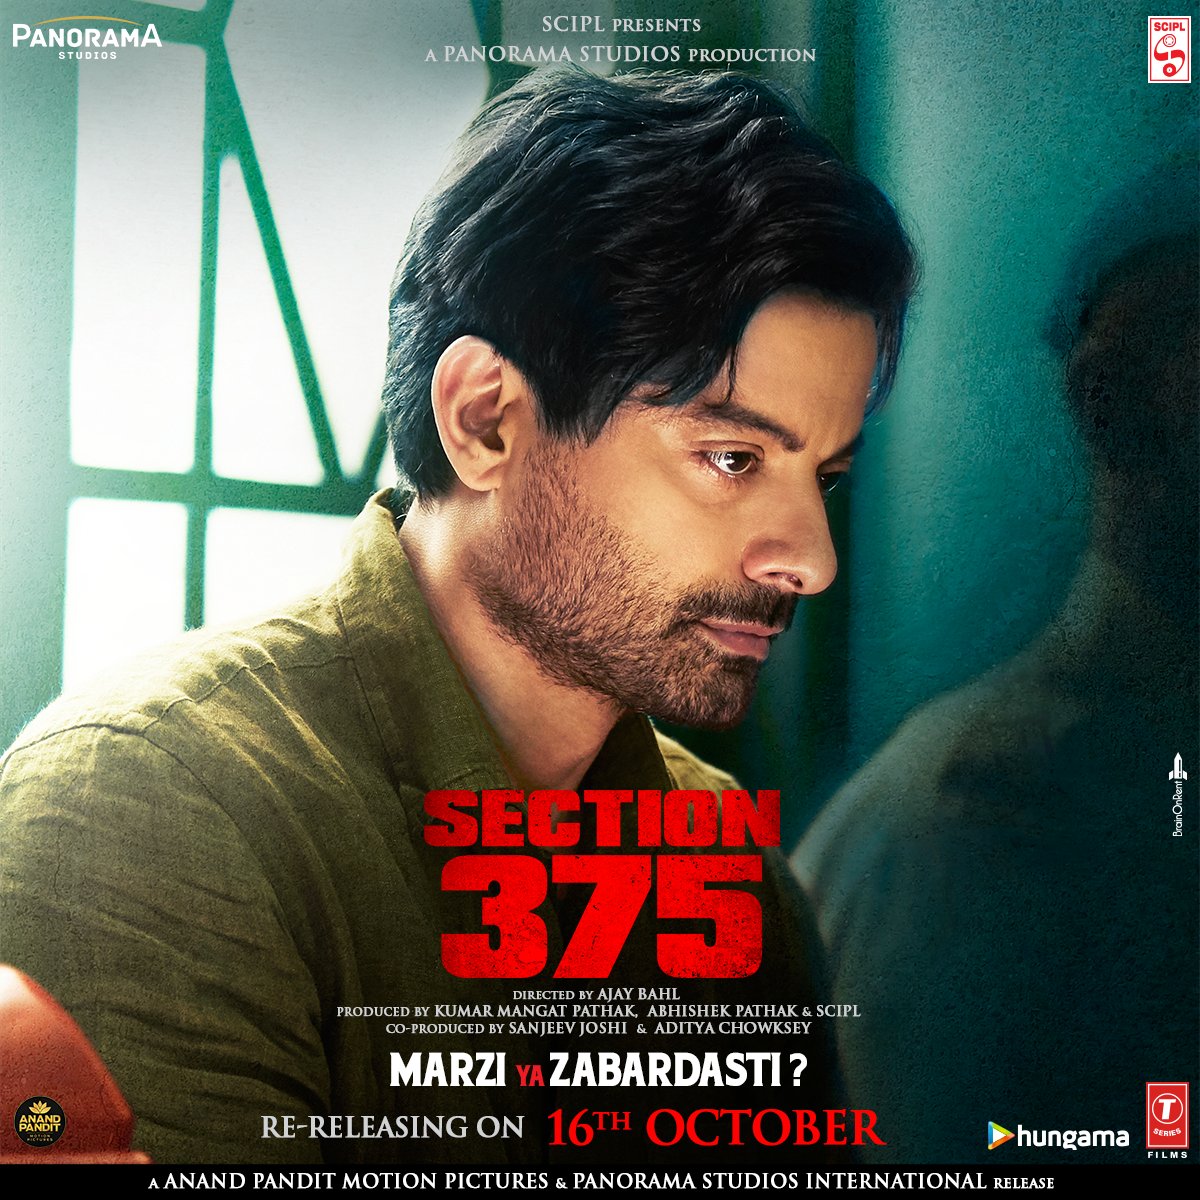 We are glad to announce that after receiving exceptional reviews from the audience during the release, #Section375 is one of the few movies set to Re-release in cinemas from 16th October 2020 onwards.
#AkshayeKhanna @RichaChadha @MeerraChopra @itsRahulBhat #AjayBahl